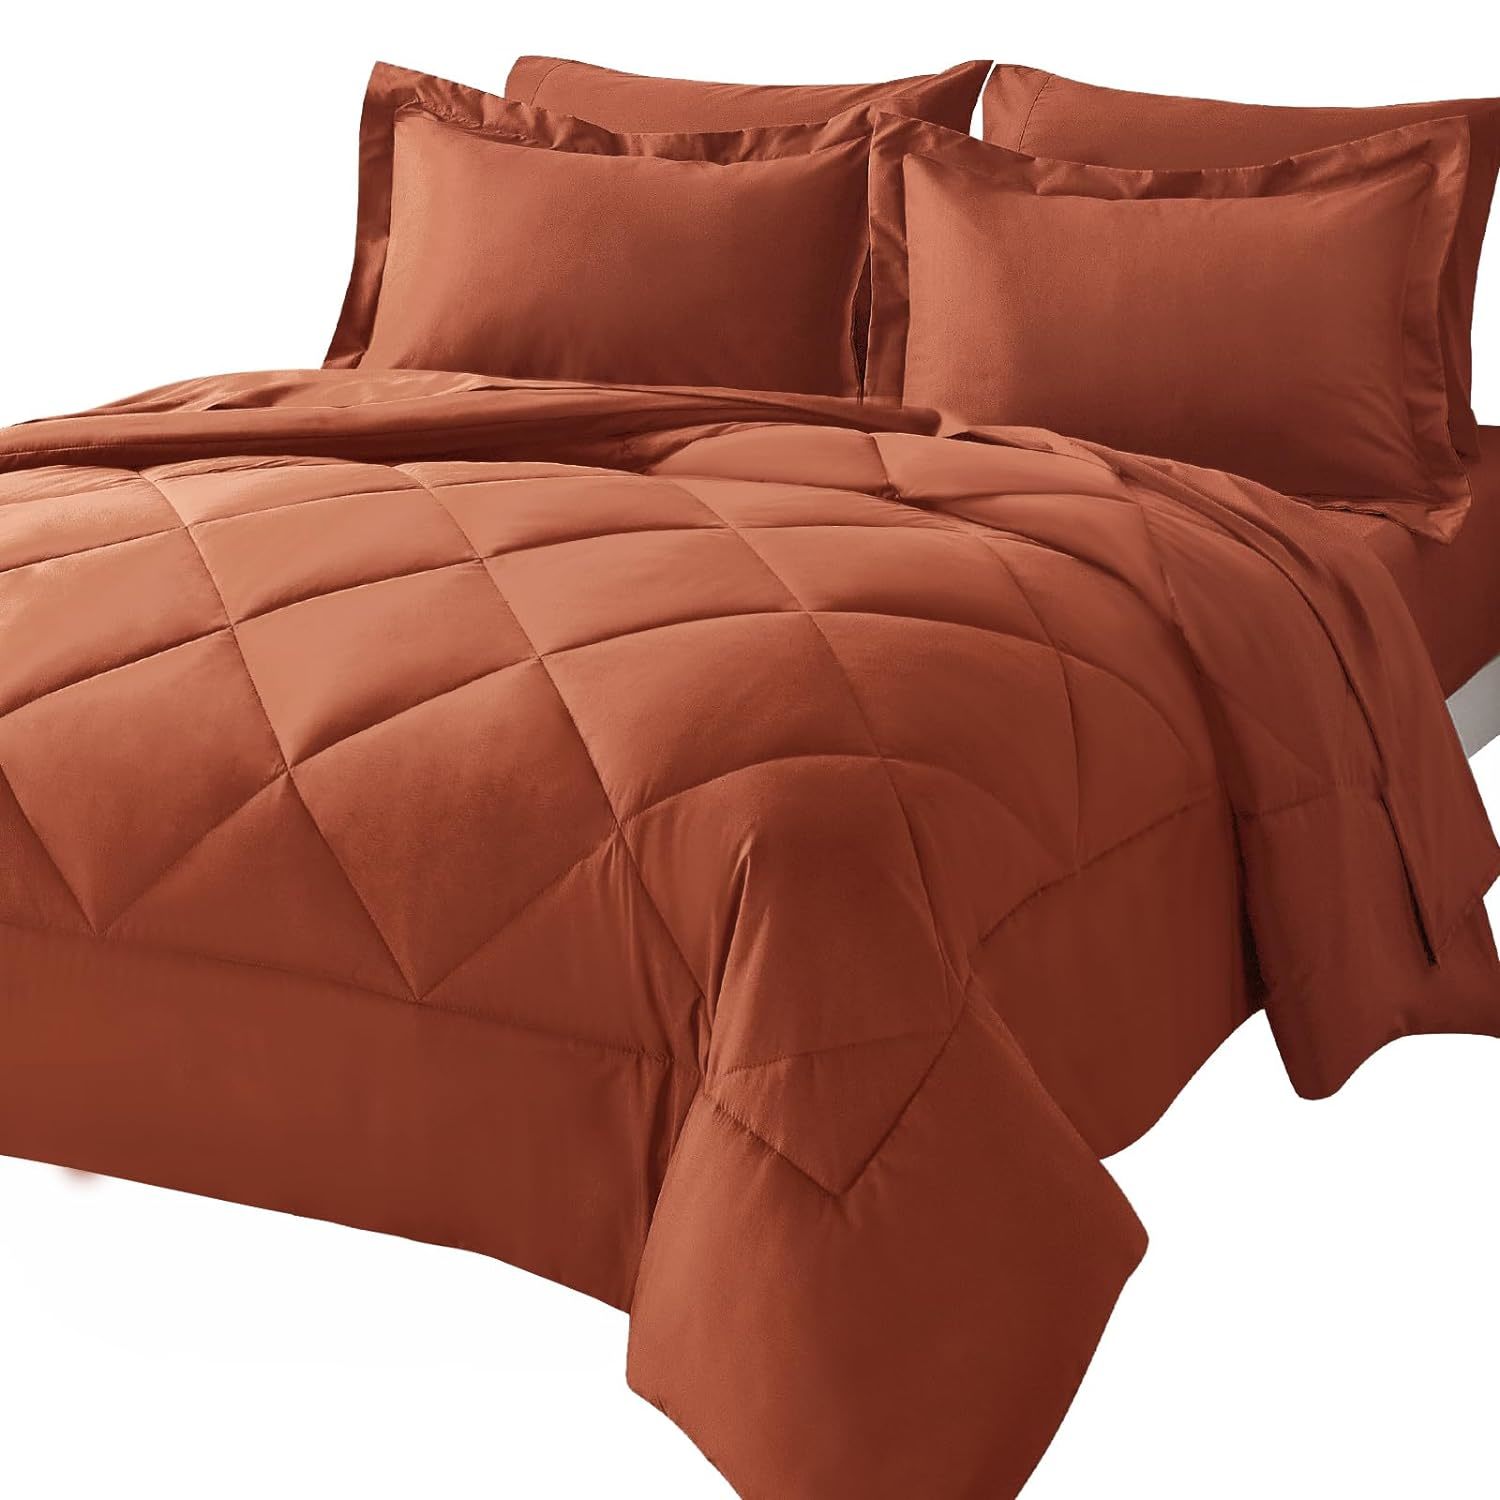 Queen Comforter Set With Sheets 7 Pieces Bed In A Bag Burnt Orange All Season Be - $114.99